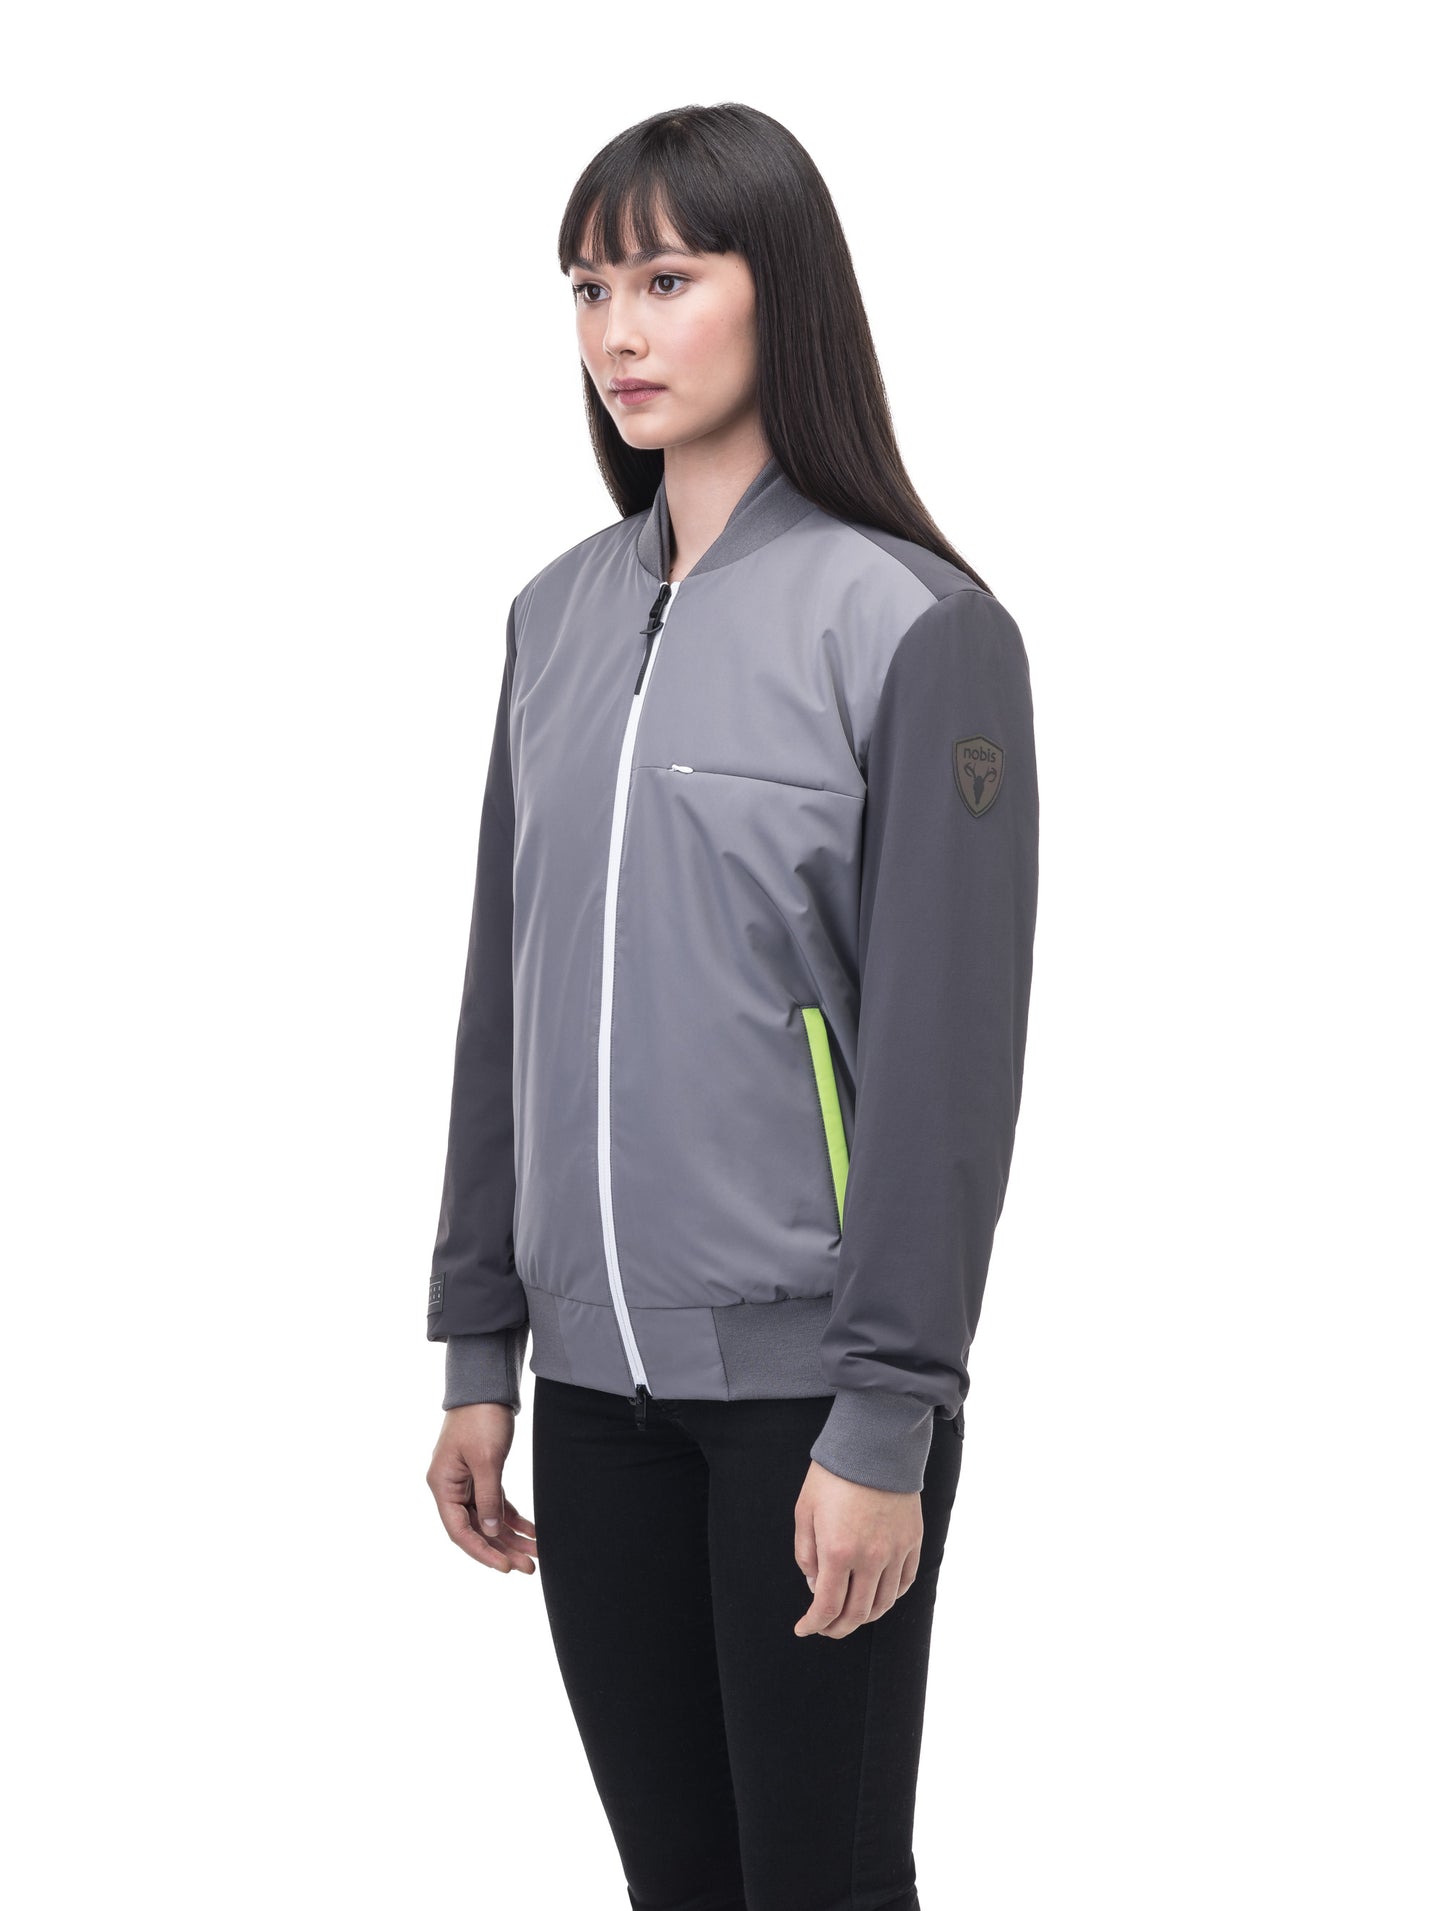 Unisex hip length bomber jacket with a contrast colour back panel, and zipper pockets at waist and an invisible zipper pocket at chest, in Concrete/Steel Grey